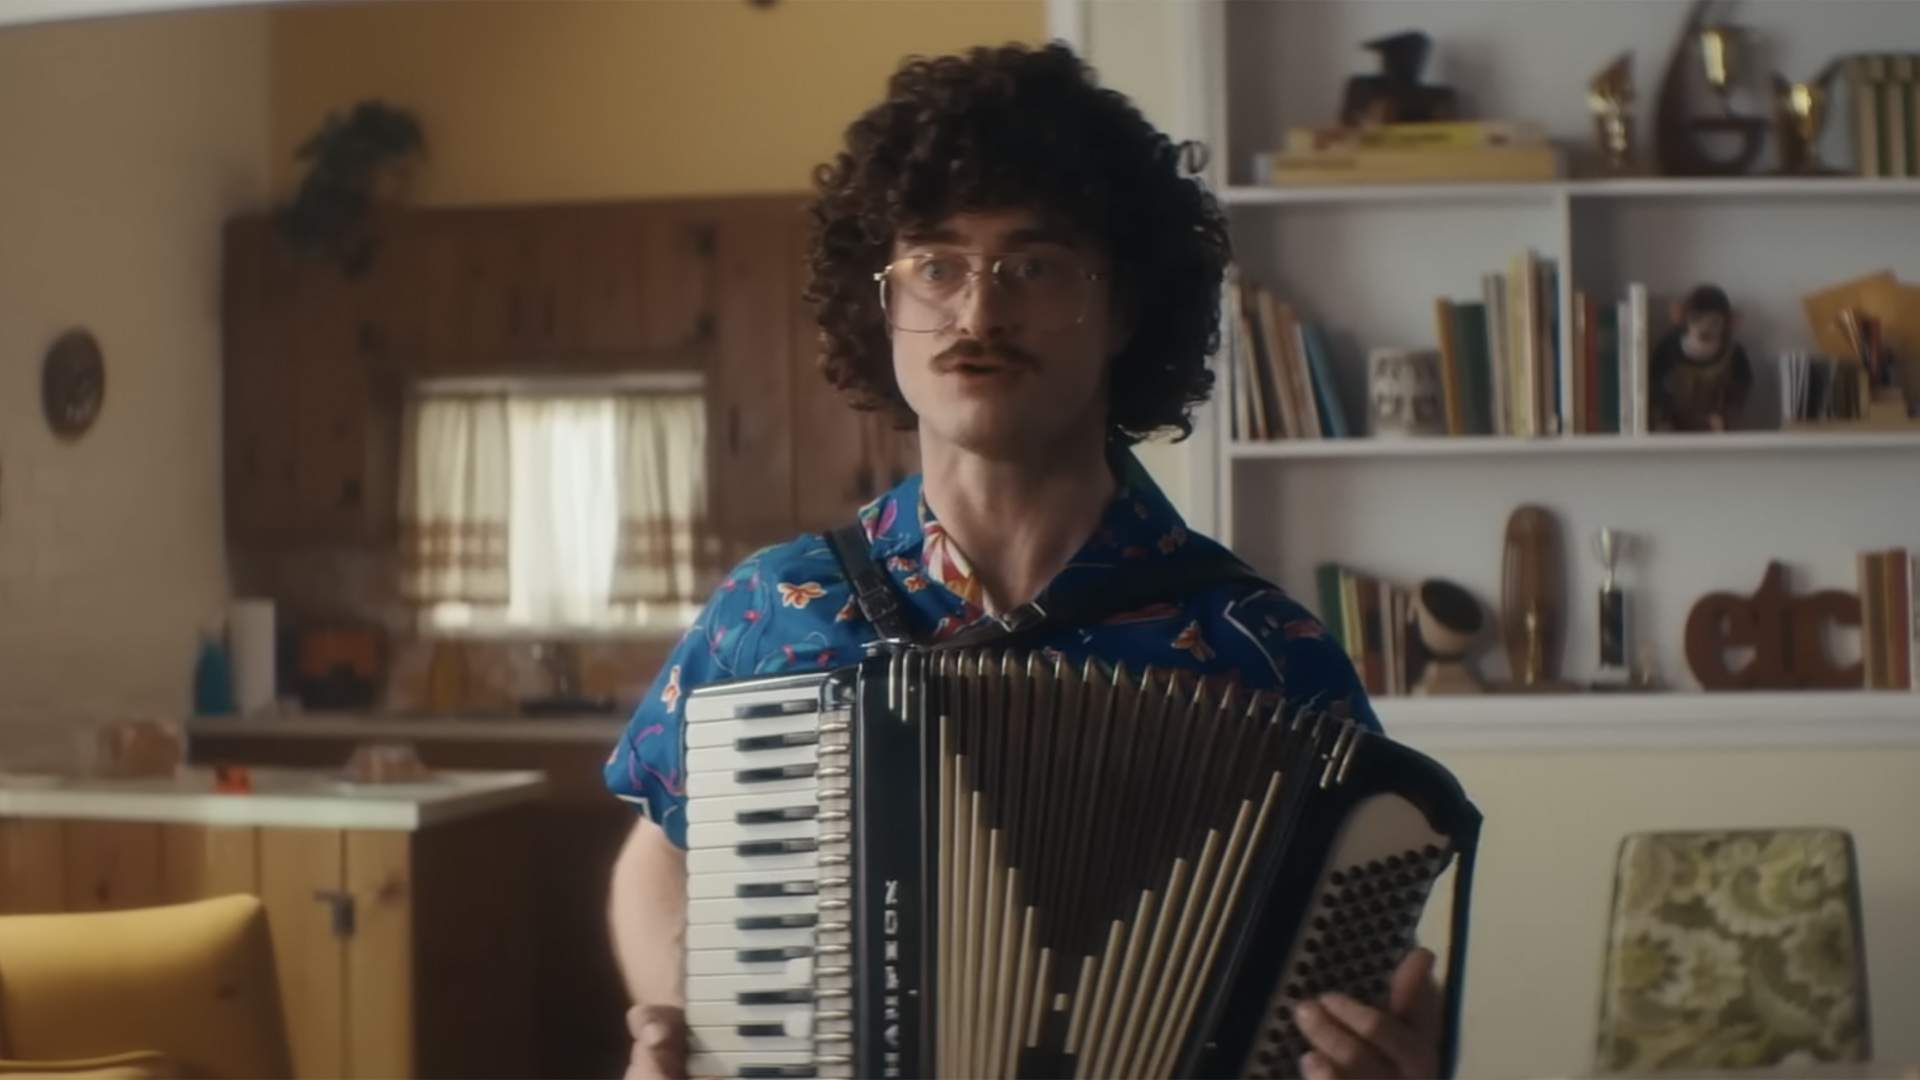 Daniel Radcliffe's Weird Al Yankovic Biopic Will Finally Be Available to Stream in Australia in March